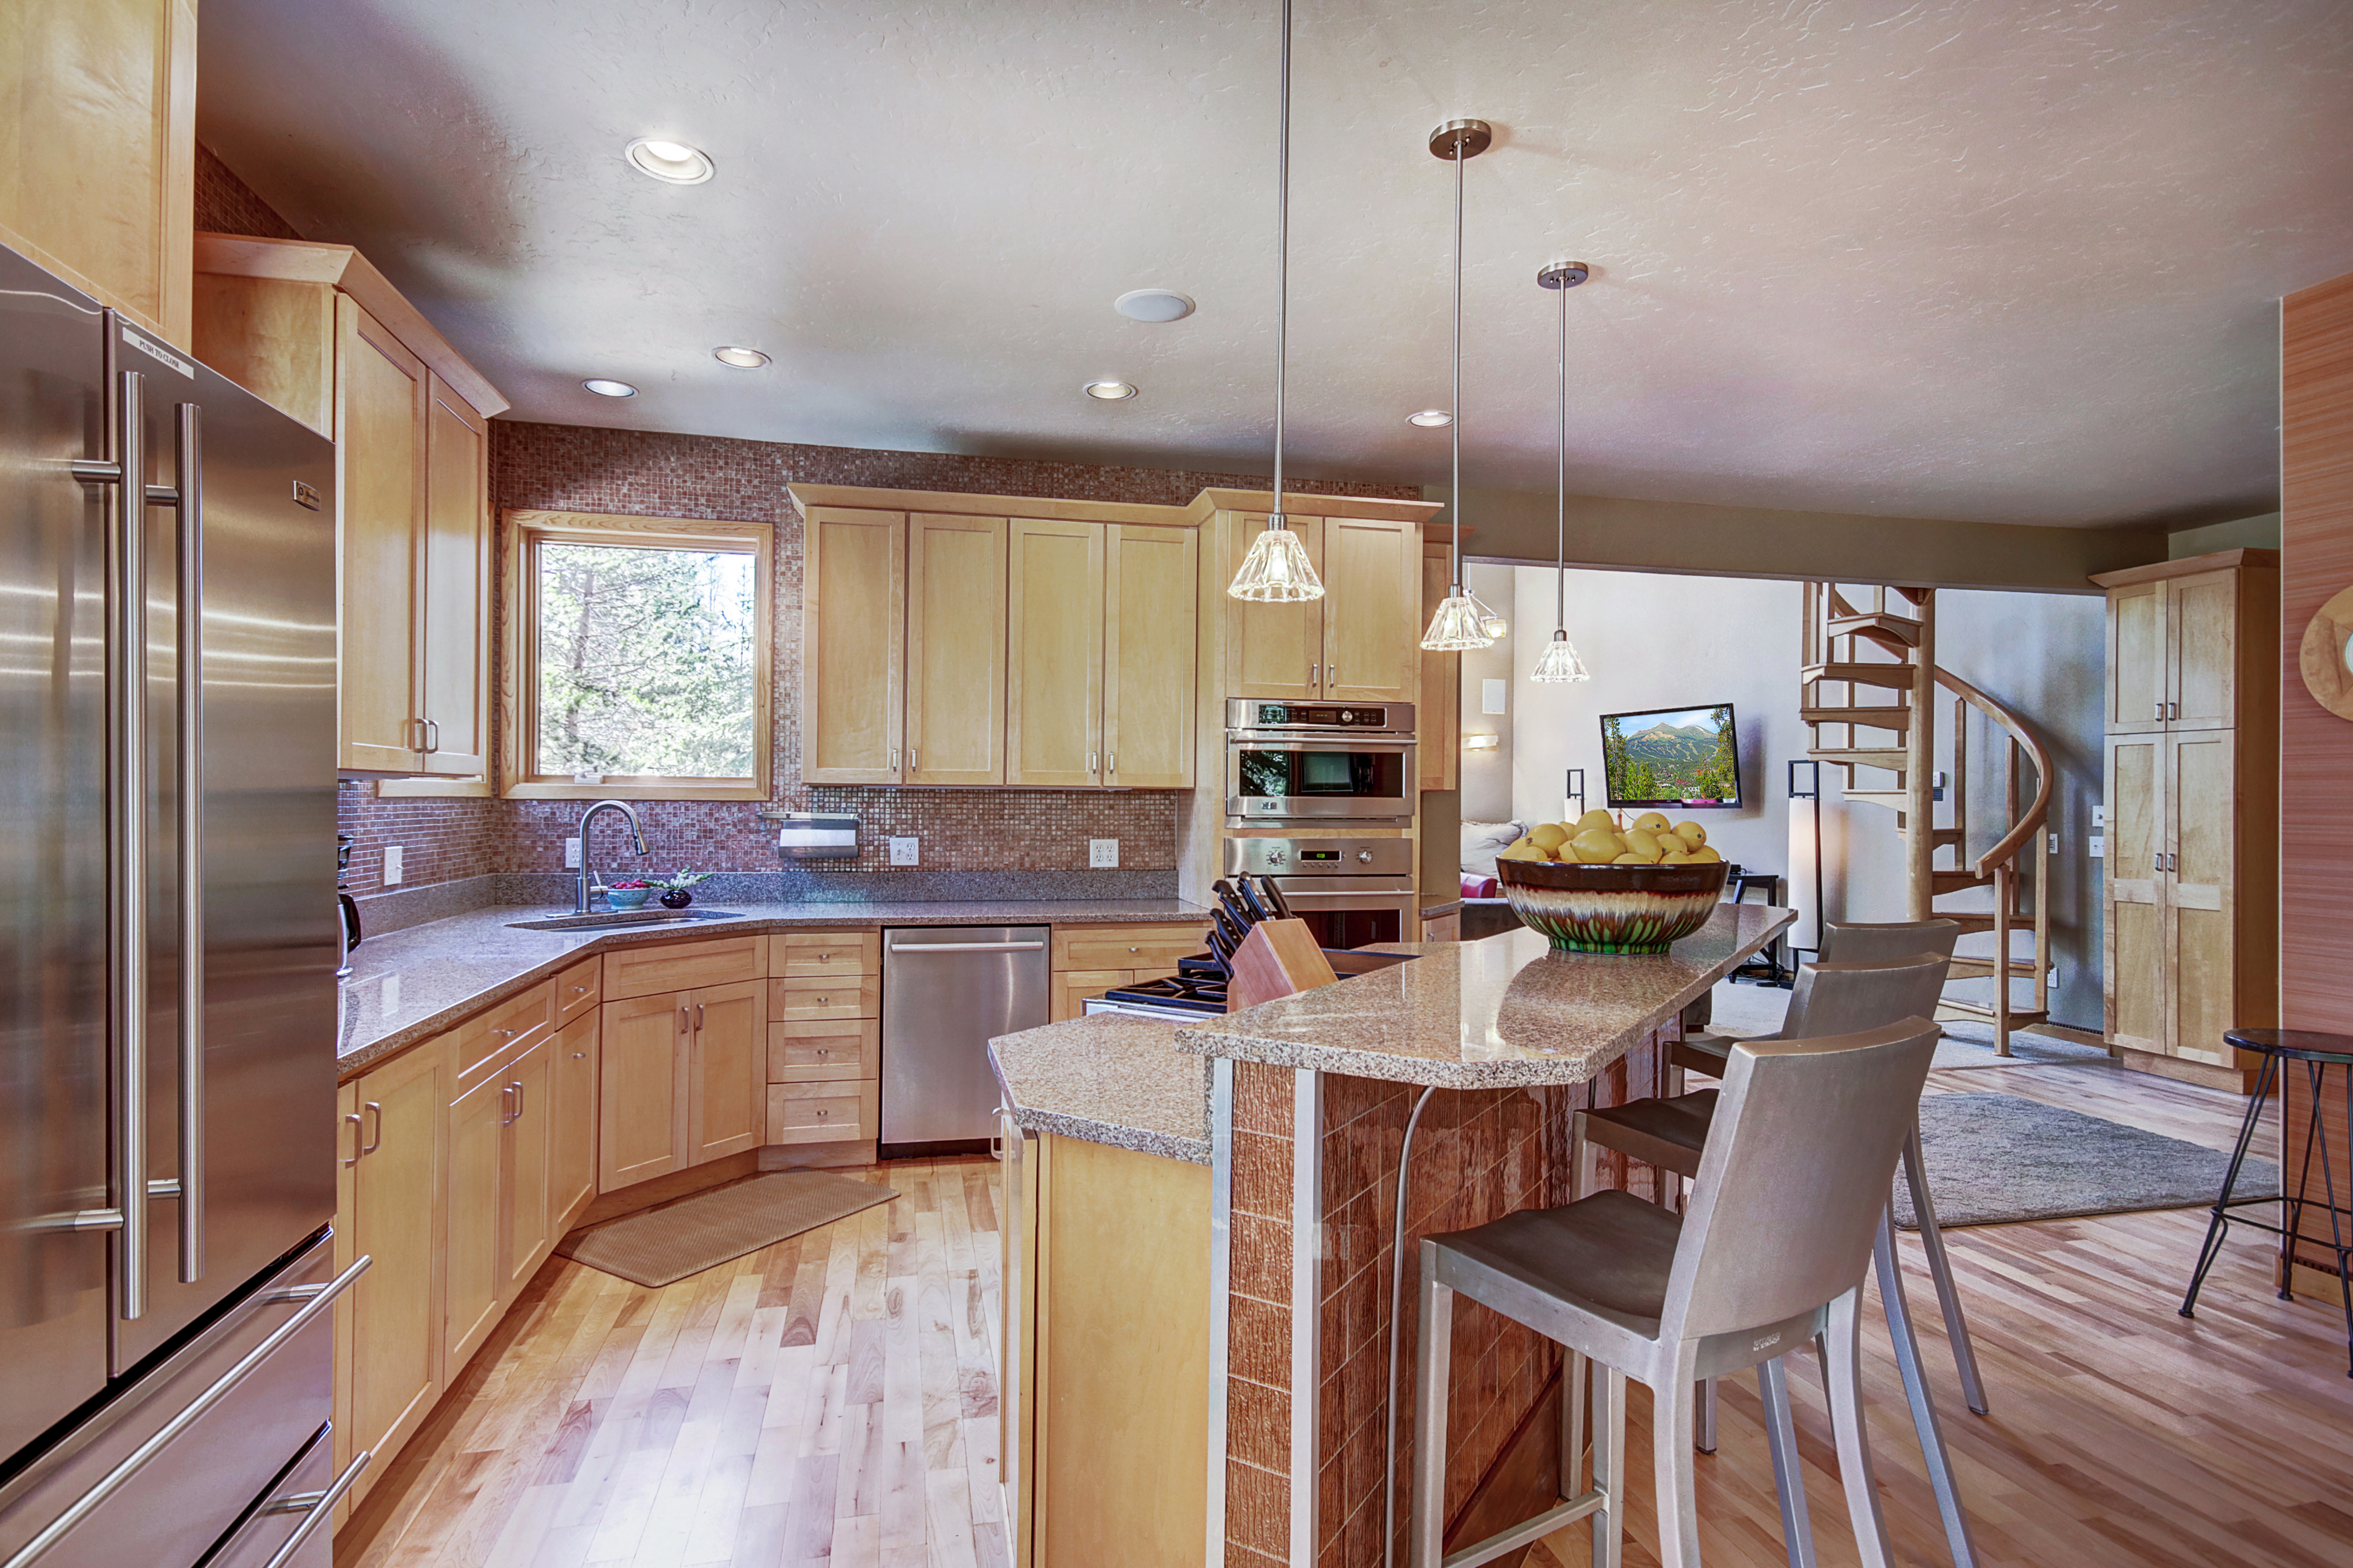 Additional view of the kitchen. - Buffalo Mountain Vista Frisco Vacation Rental